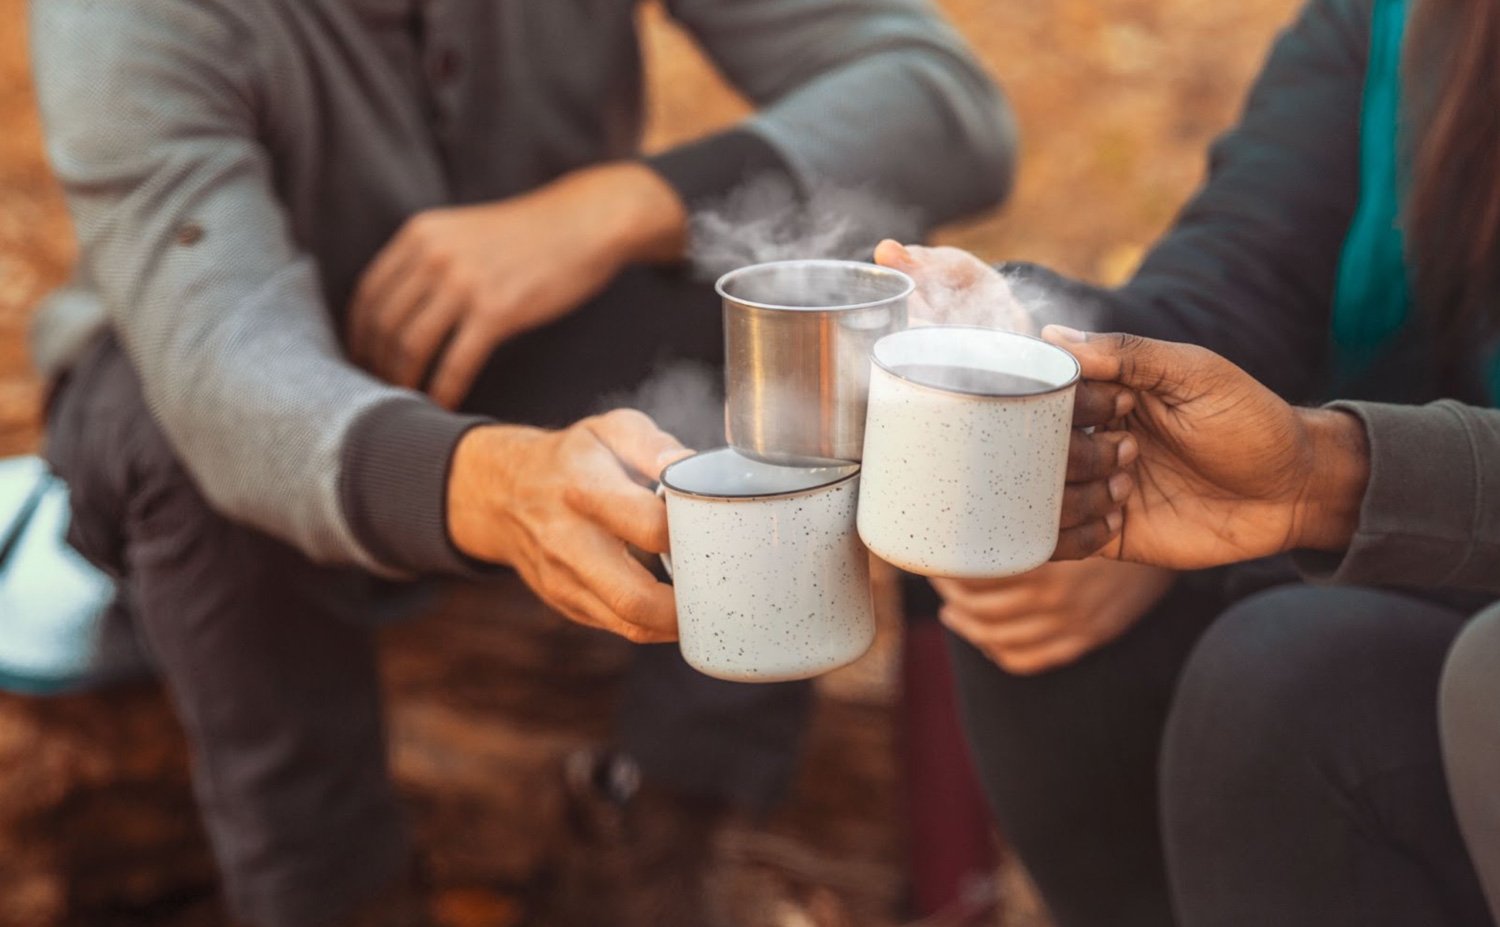 People toasting with their coffee mugs near a campfire